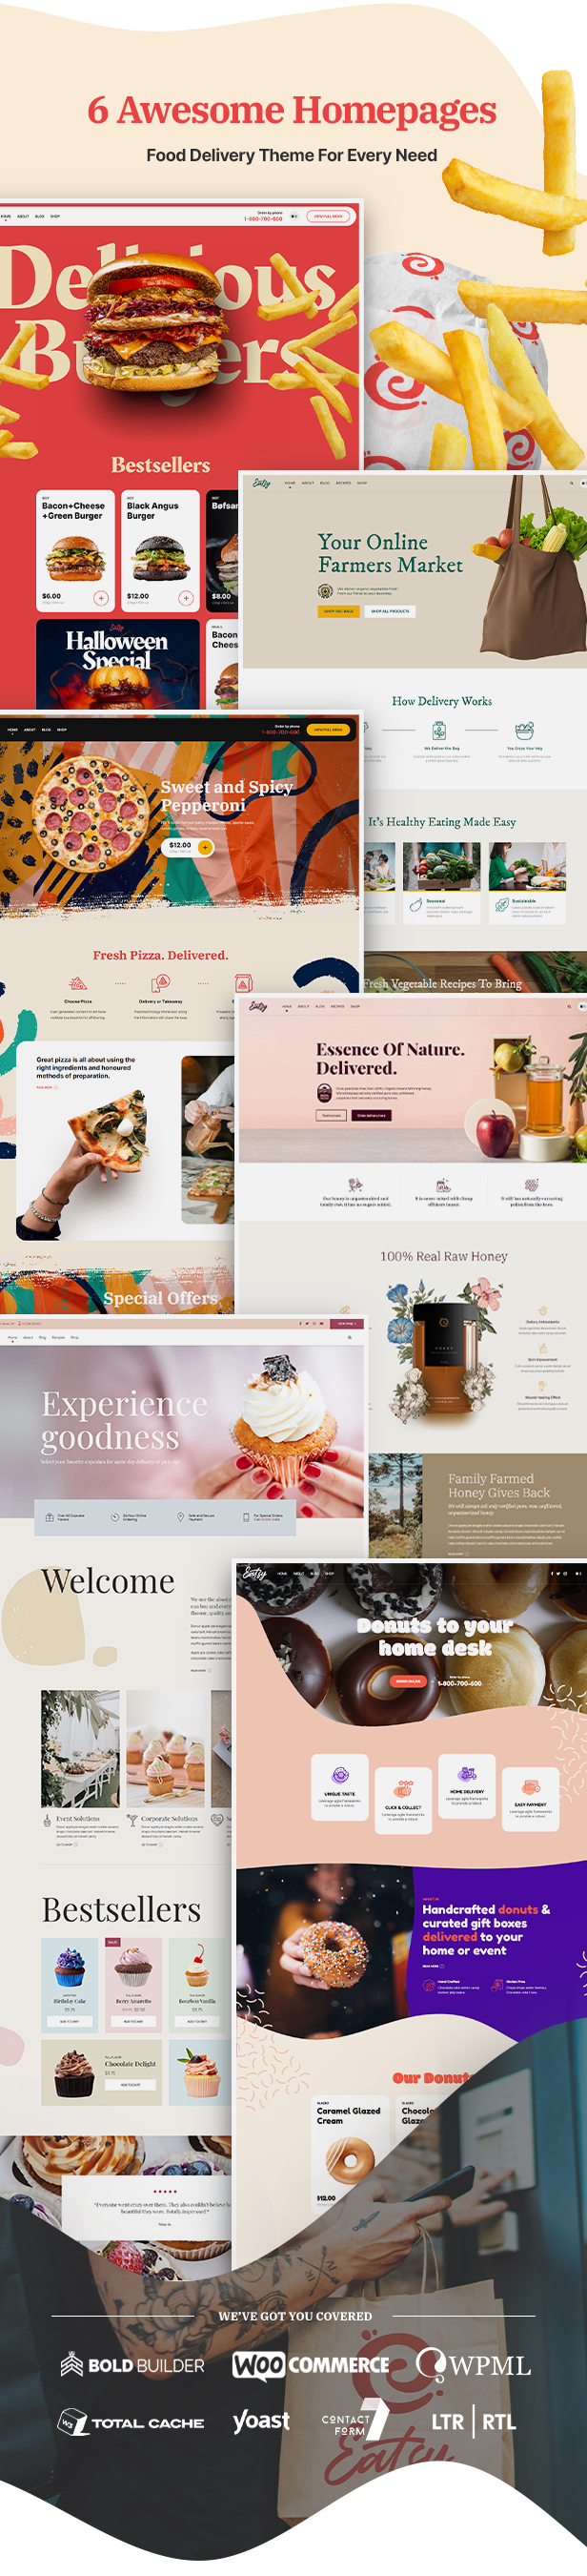 A selection of great food delivery restaurants WordPress theme pages.